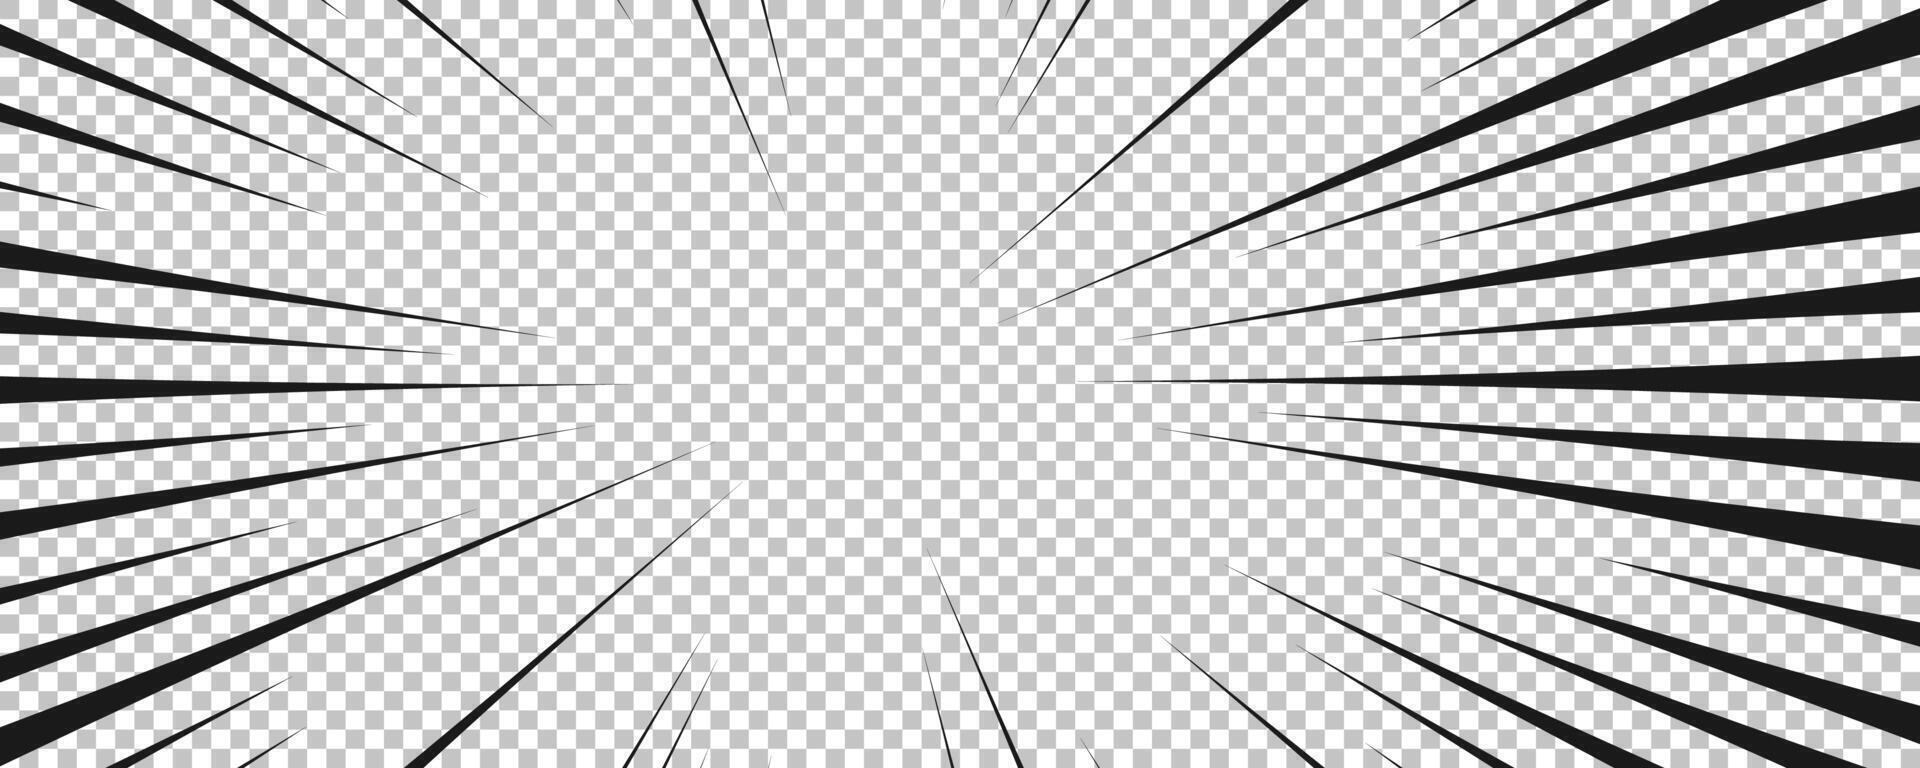 Comic book page with black lines isolated on background. Template with flash explosion rays effect texture. illustration vector